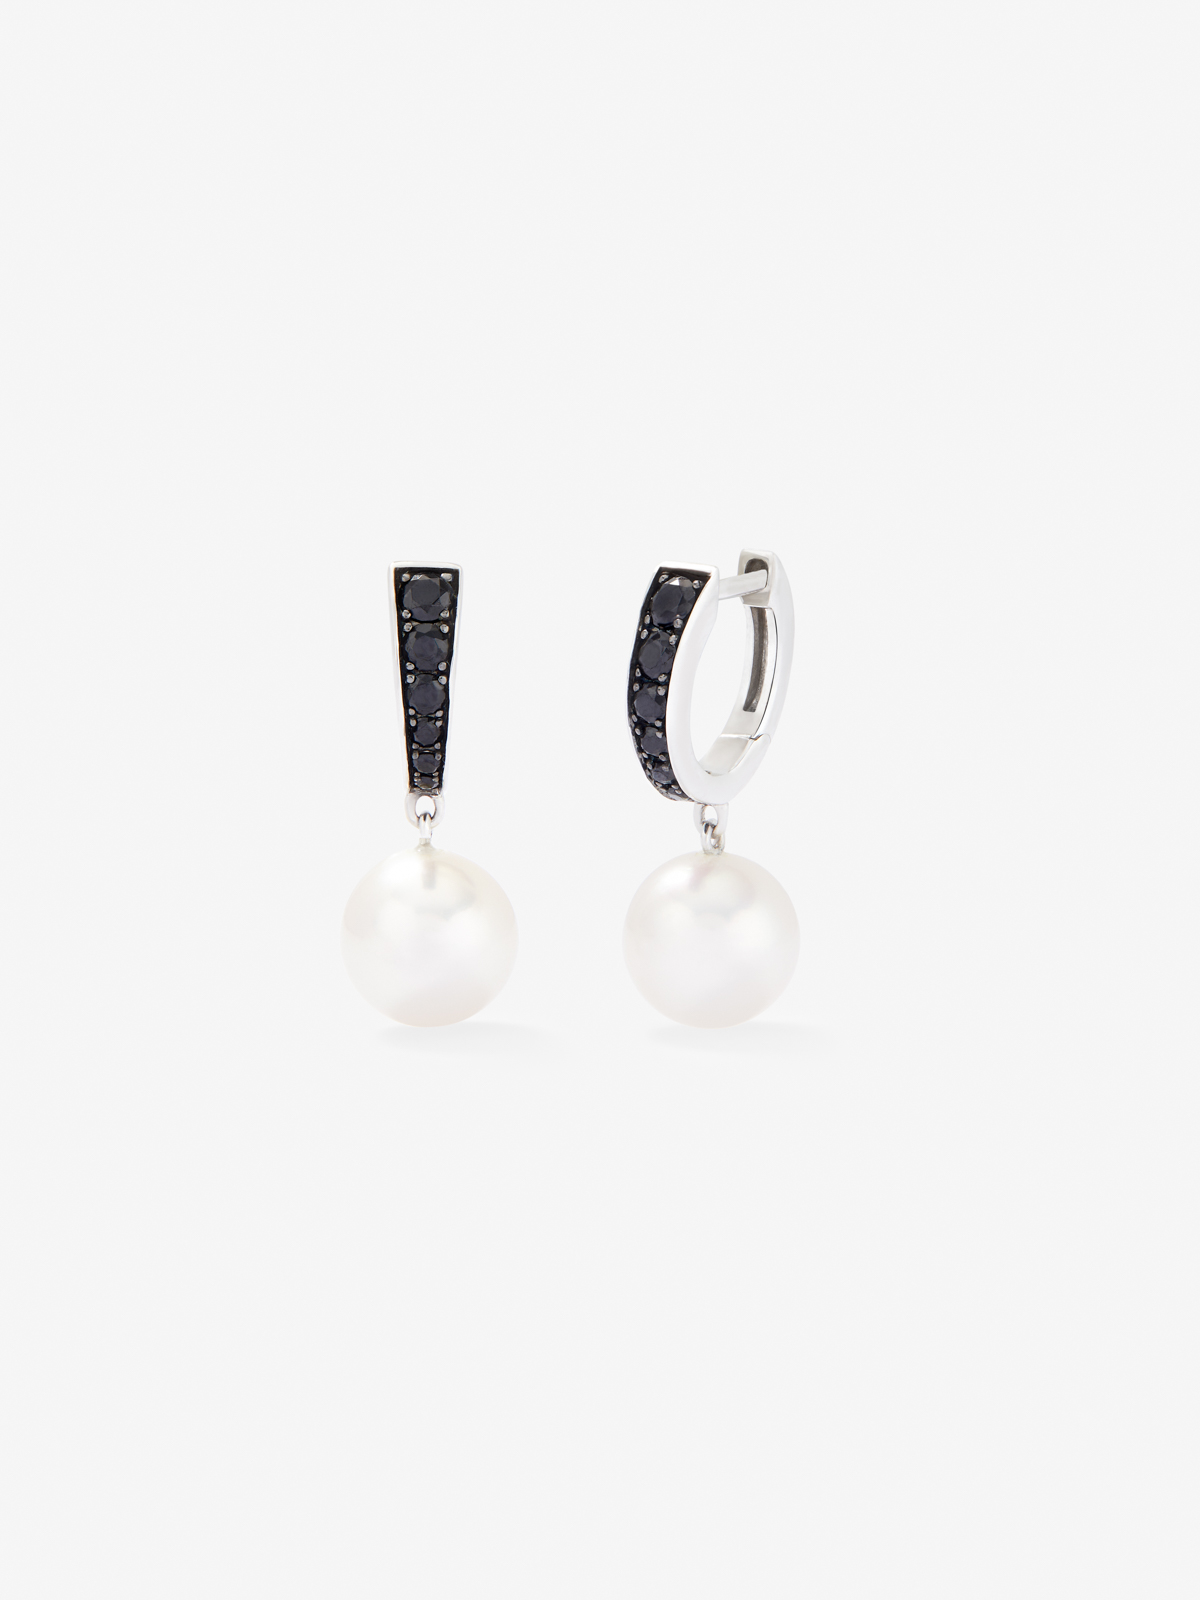 925 Silver hoop earrings with 0.32 cts black spinels and 8.5mm akoya pearls